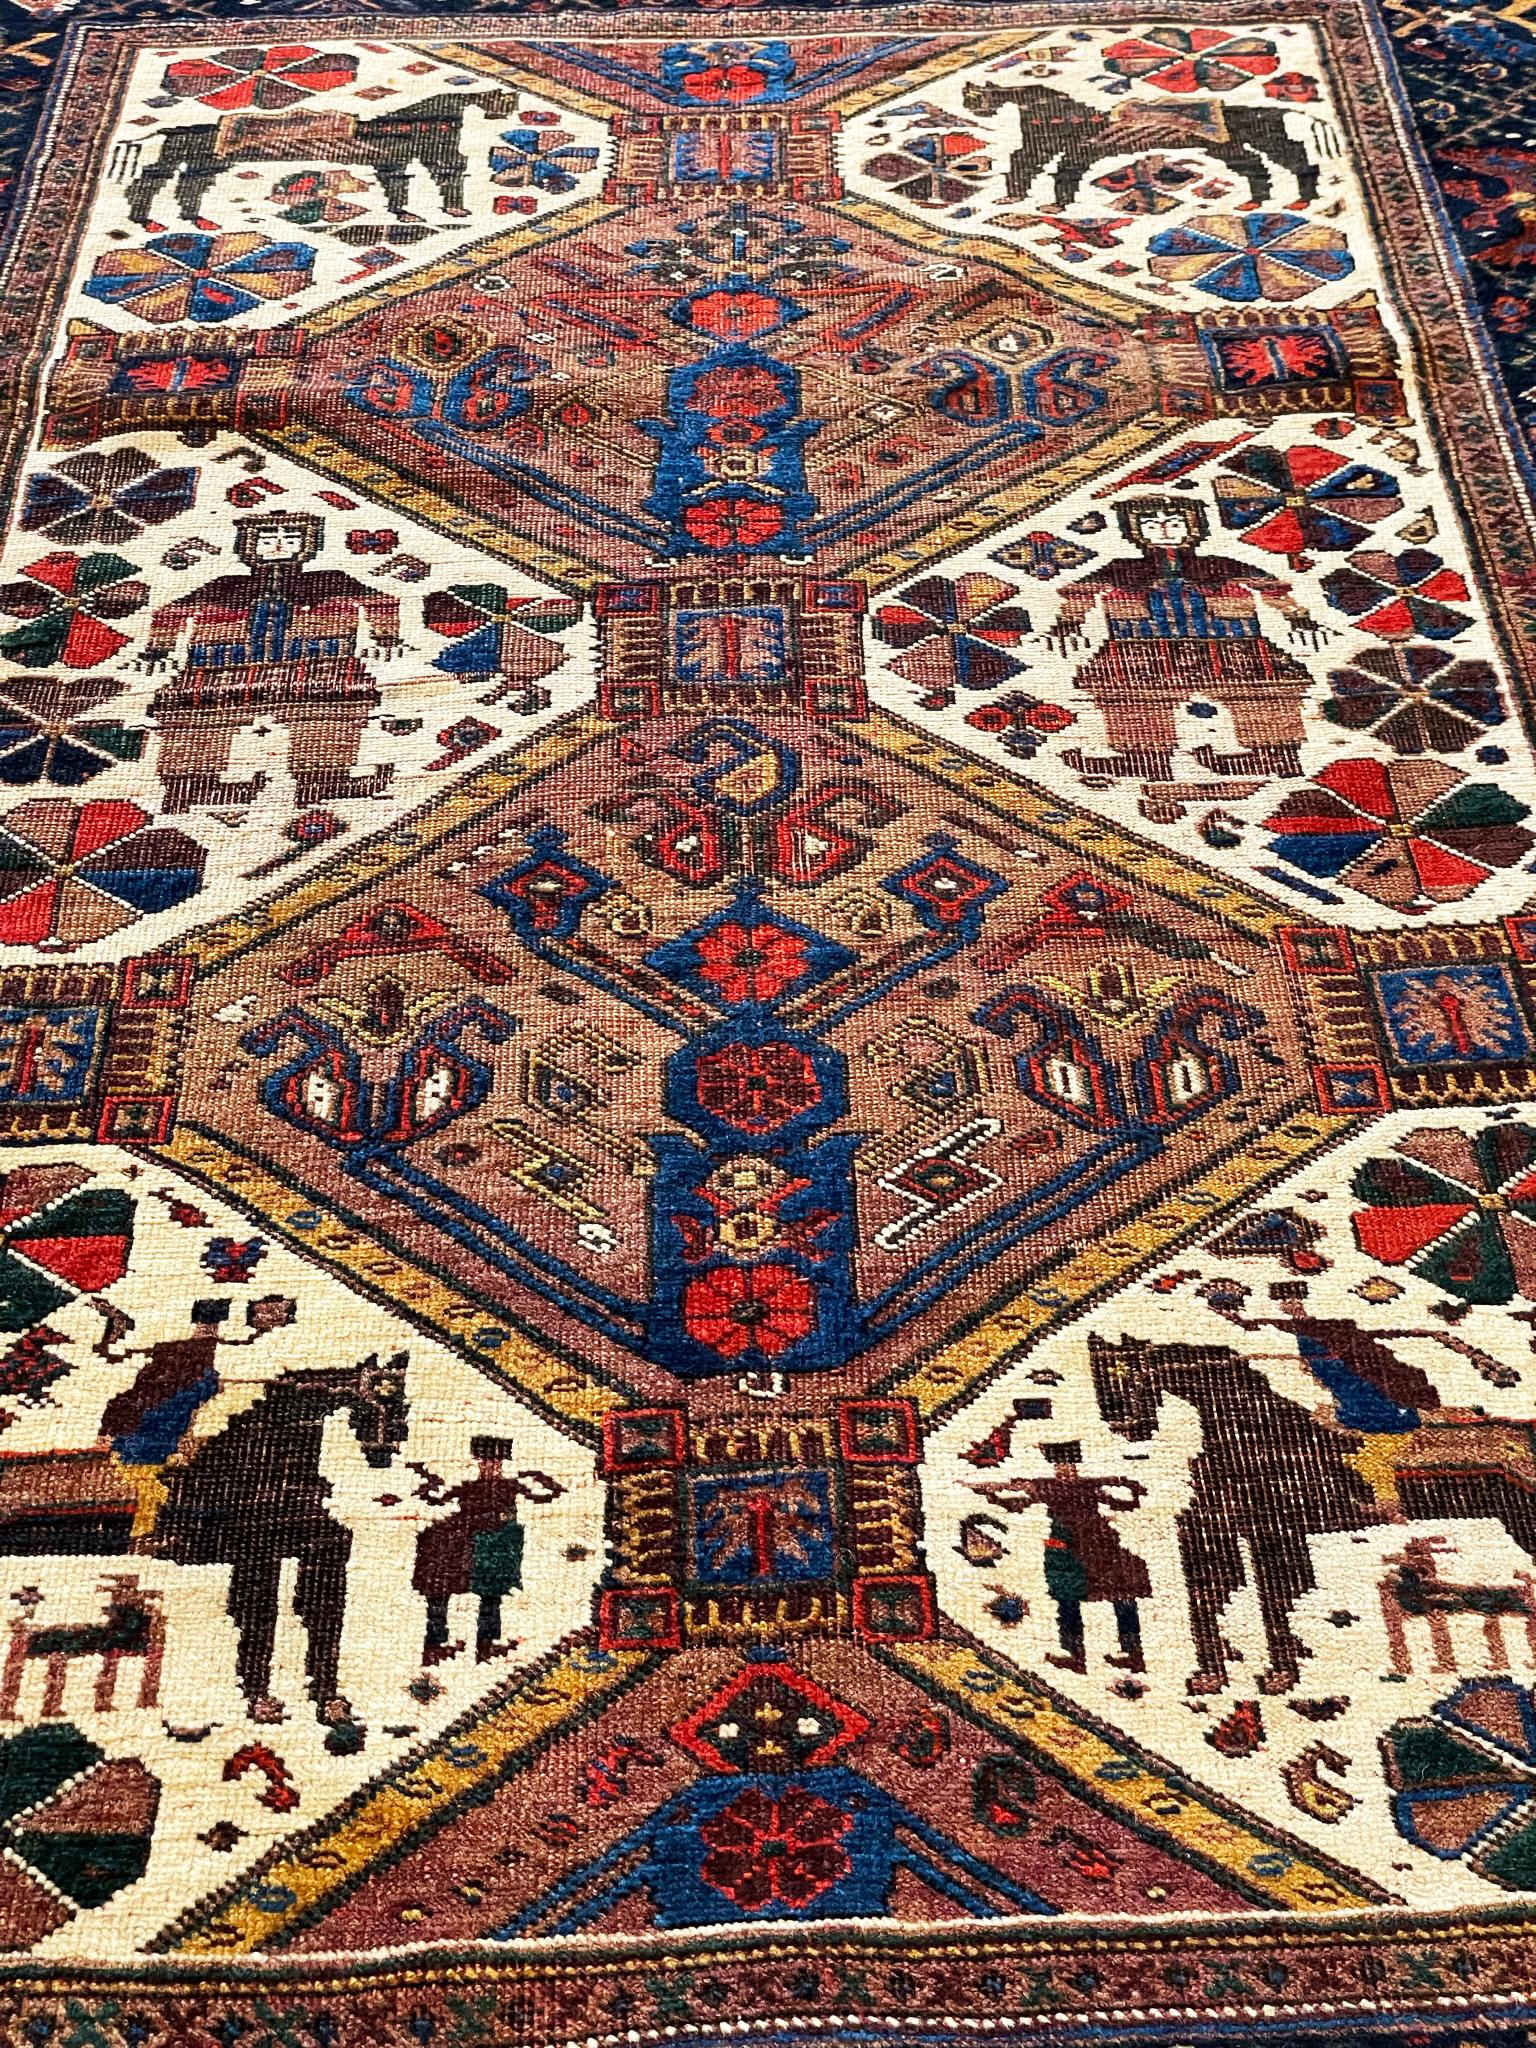 Antique Persian Tribal Afshar Pictorial Rug, C-1880's In Good Condition For Sale In Evanston, IL